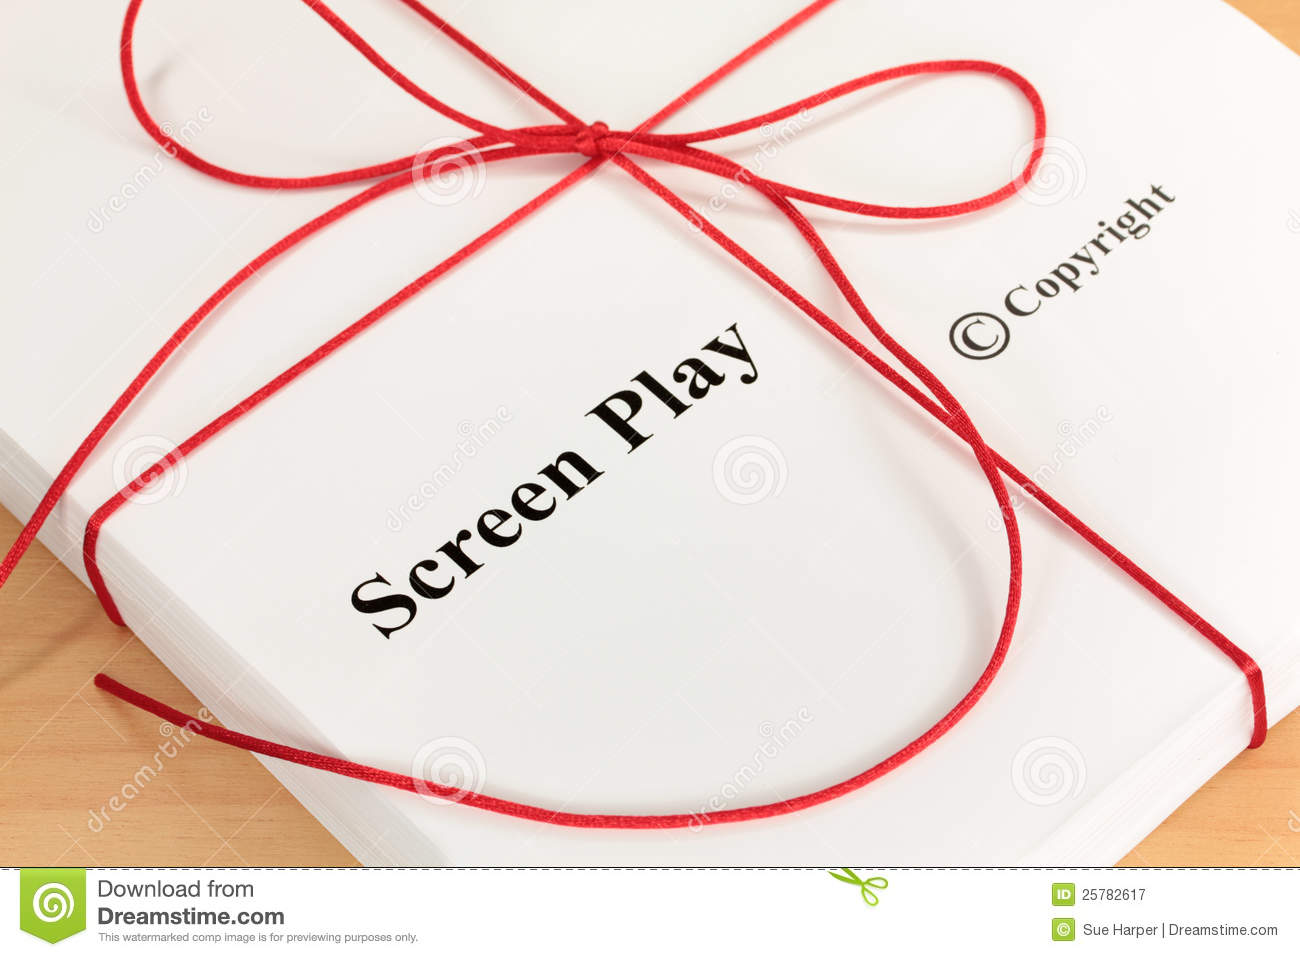 Screenplay Script With Red Twine Royalty Free Stock Photography    